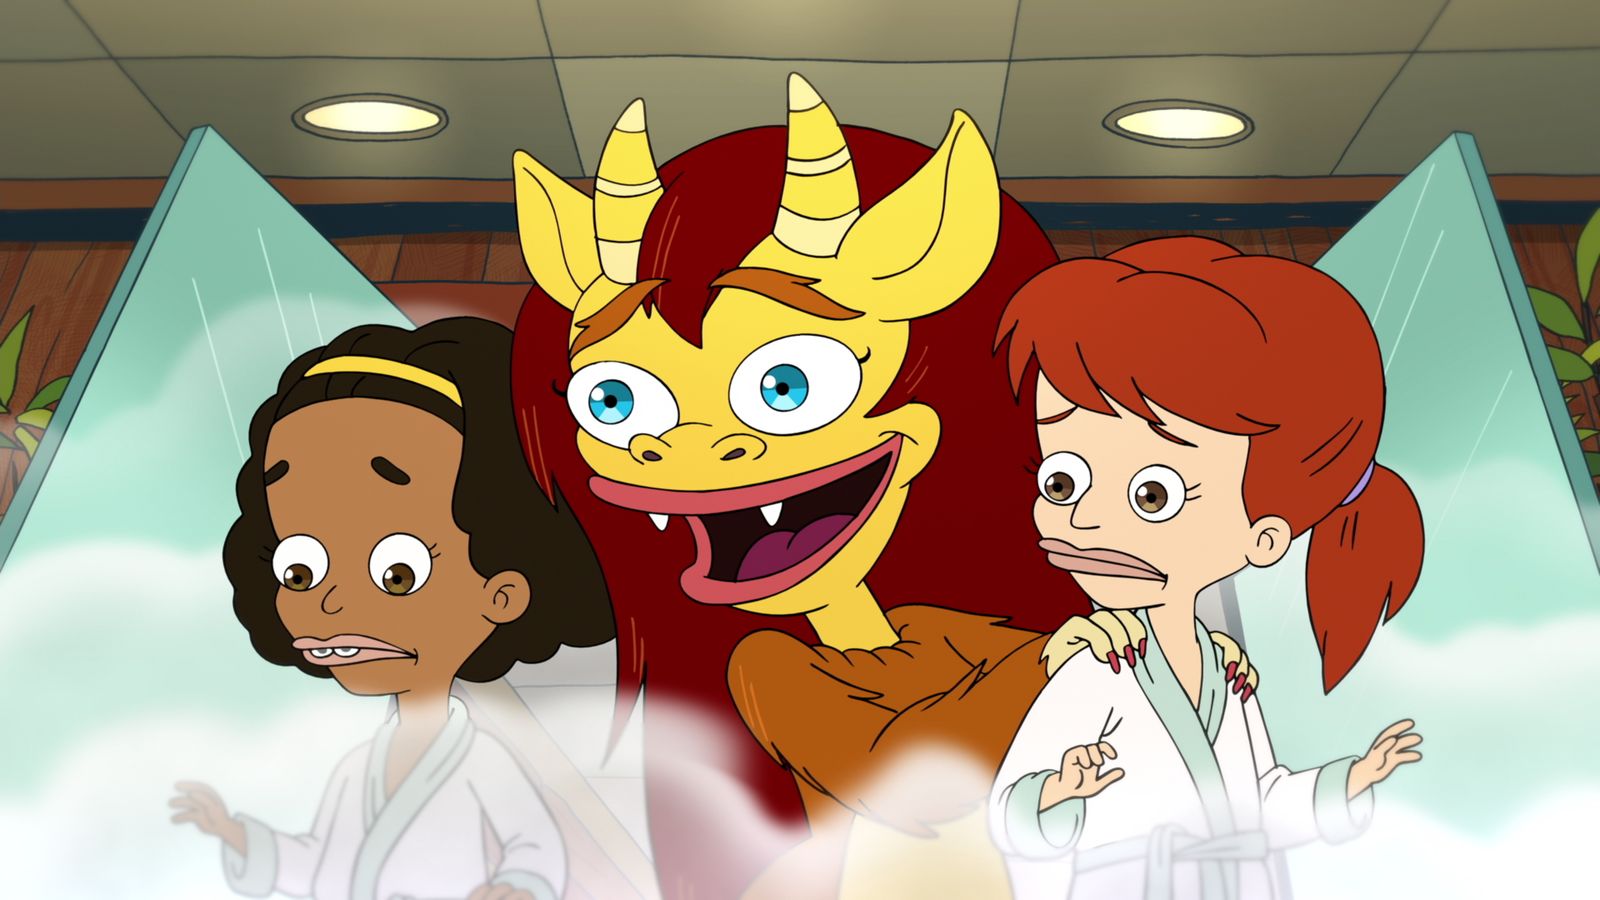 Big Mouth' Season 2 Tackles Planned Parenthood - The Atlantic